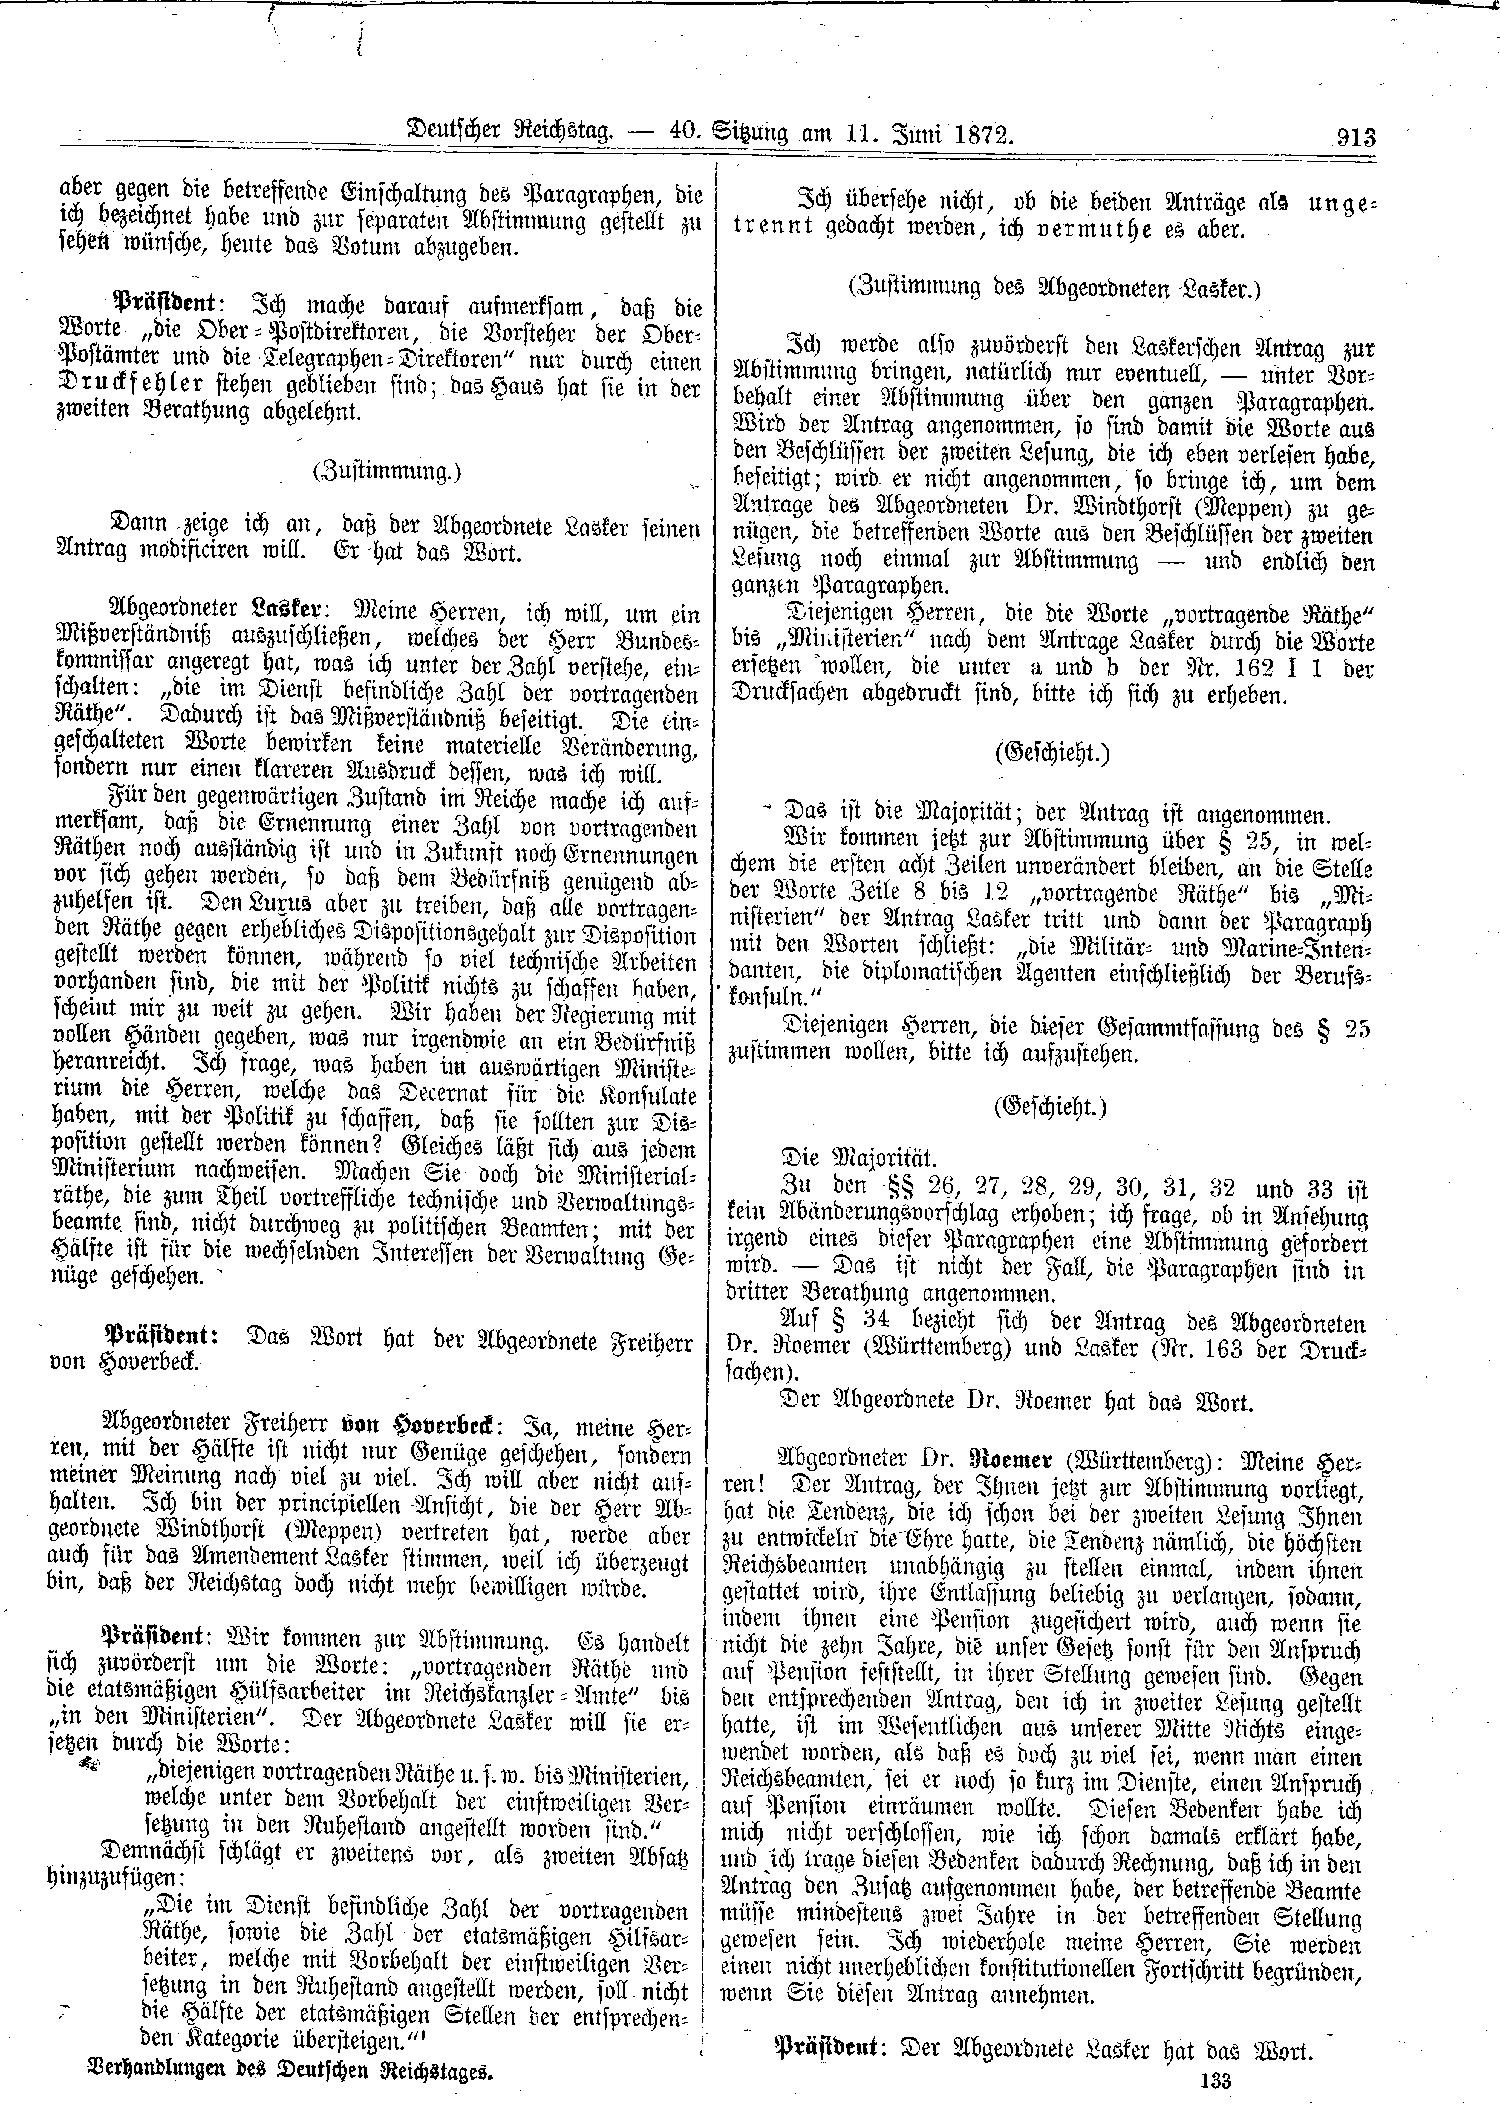 Scan of page 913